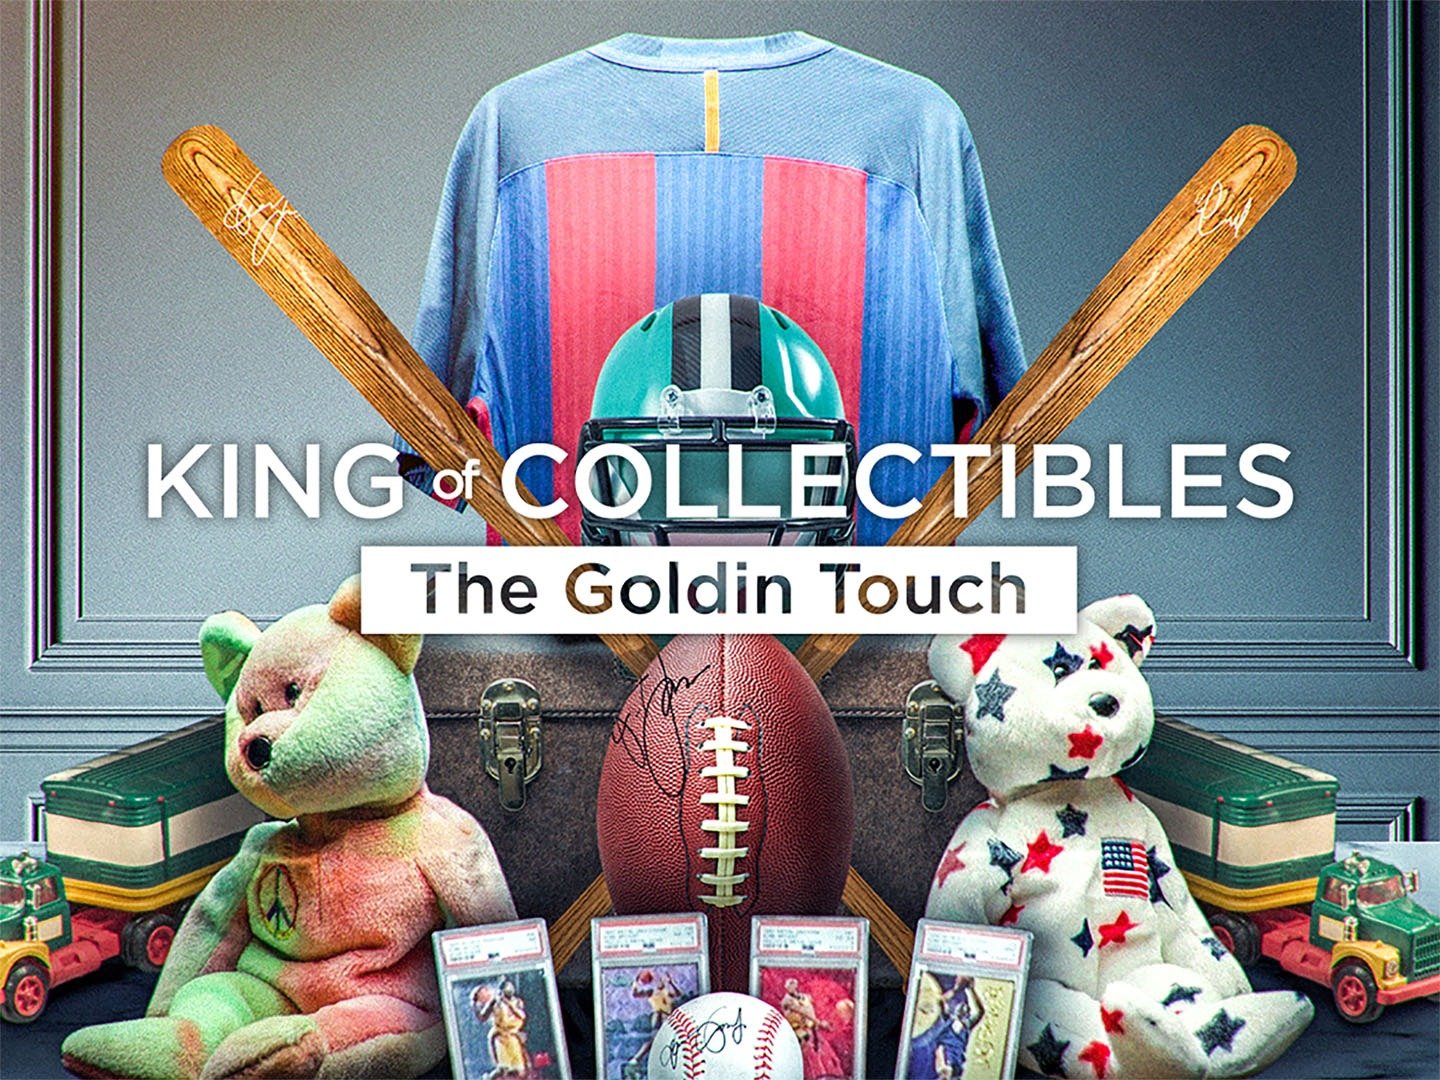 King of Collectibles: The Goldin Touch - Rotten Tomatoes